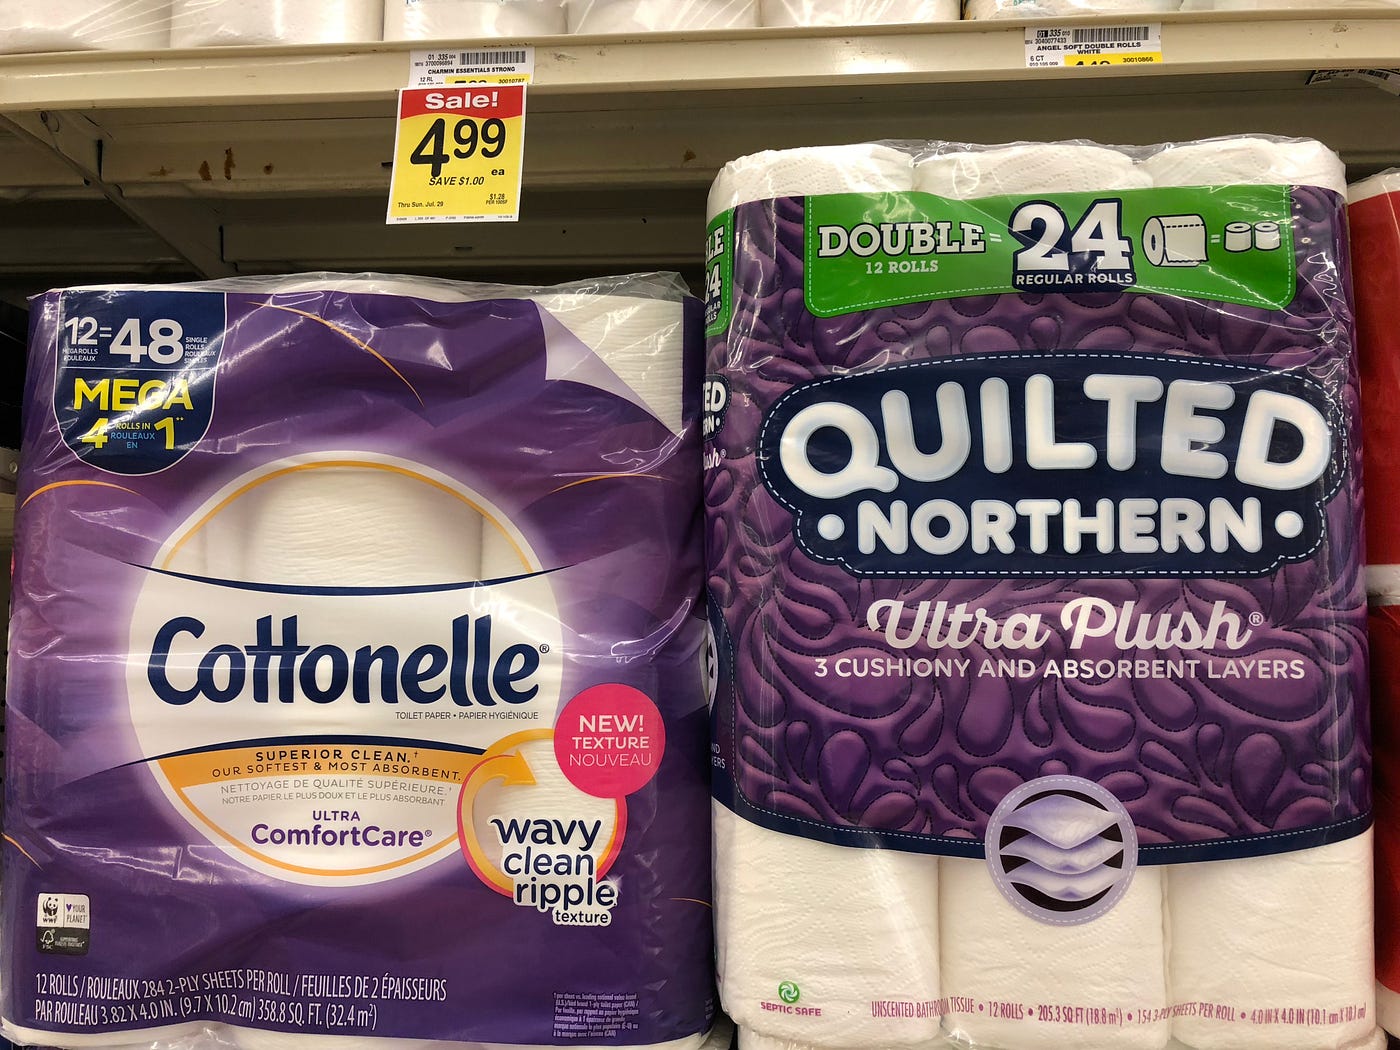 Colored Toilet Paper: What Happened to It?